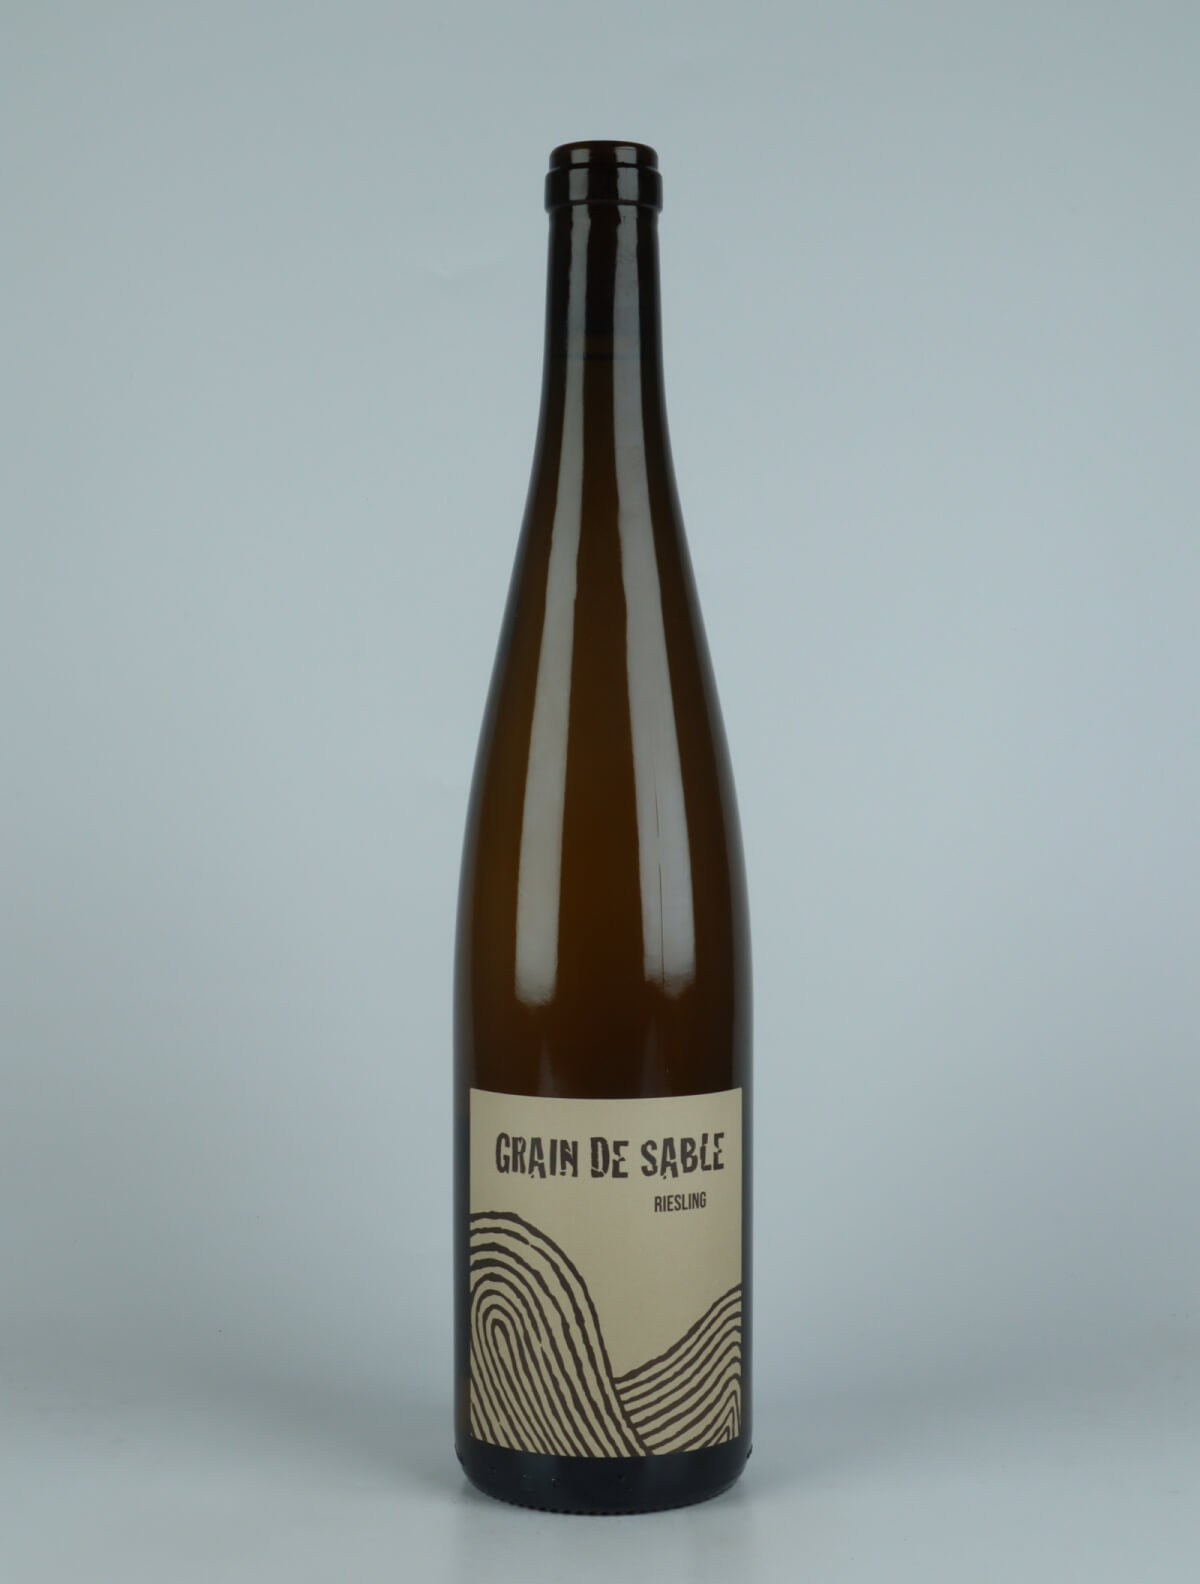 A bottle 2021 Riesling Grain de Sable White wine from Ruhlmann Dirringer, Alsace in France